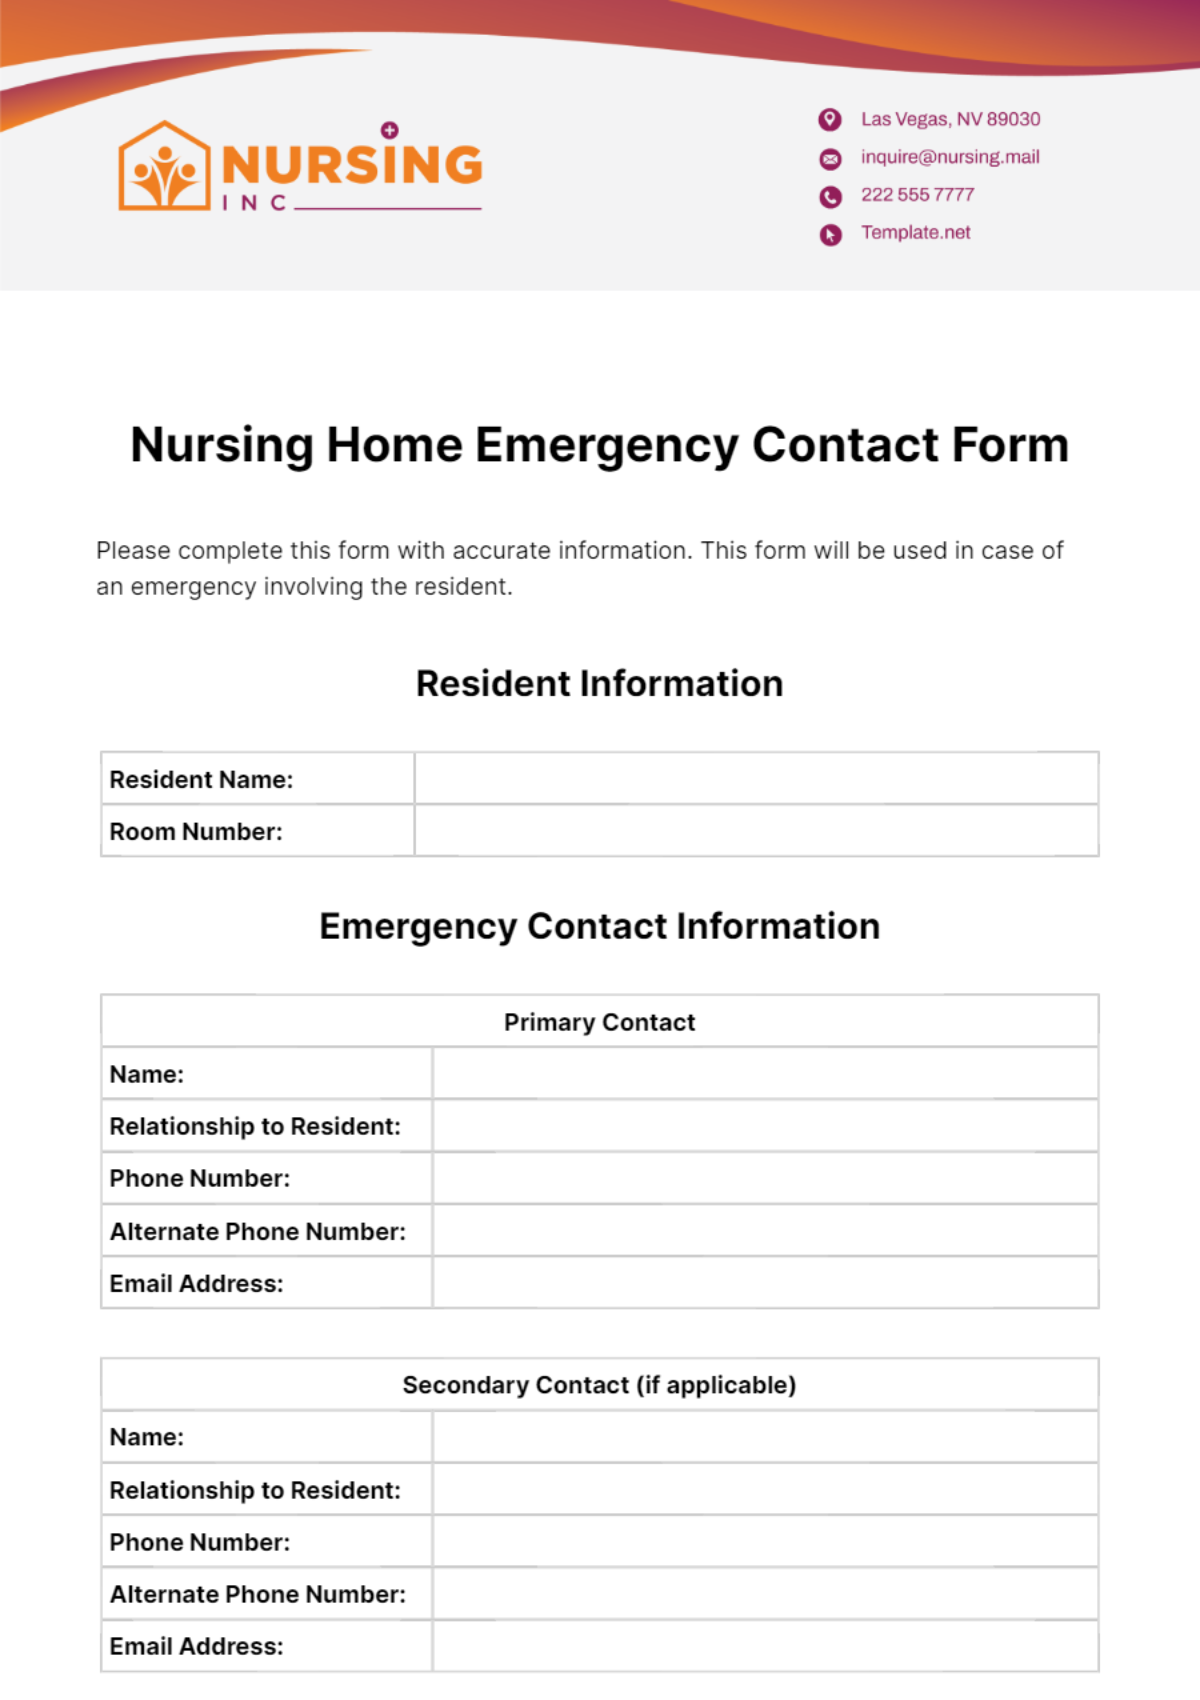 Nursing Home Emergency Contact Form Template Edit Online Download